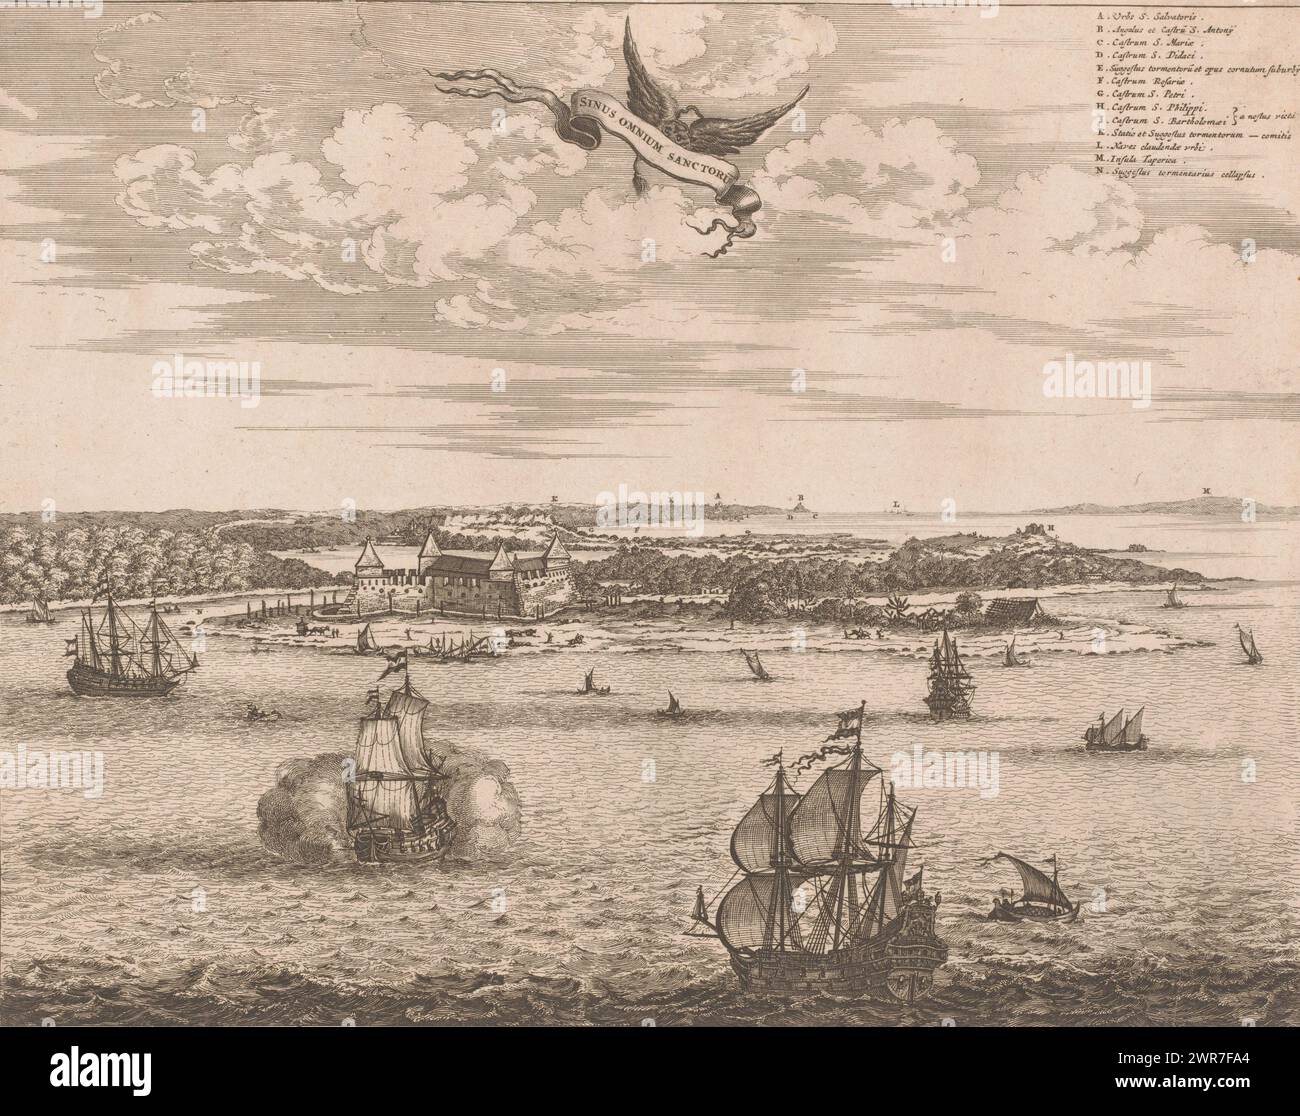 View of the Bay of All Saints, Sinus omnium sanctorum (title on object), View of the Bay of All Saints (Baía de Todos os Santos) in Central America near the city of Salvador. Top right a legend with placeholders., print maker: anonymous, publisher: Jacob van Meurs, Amsterdam, 1671, paper, etching, height 284 mm, width 362 mm, print Stock Photo